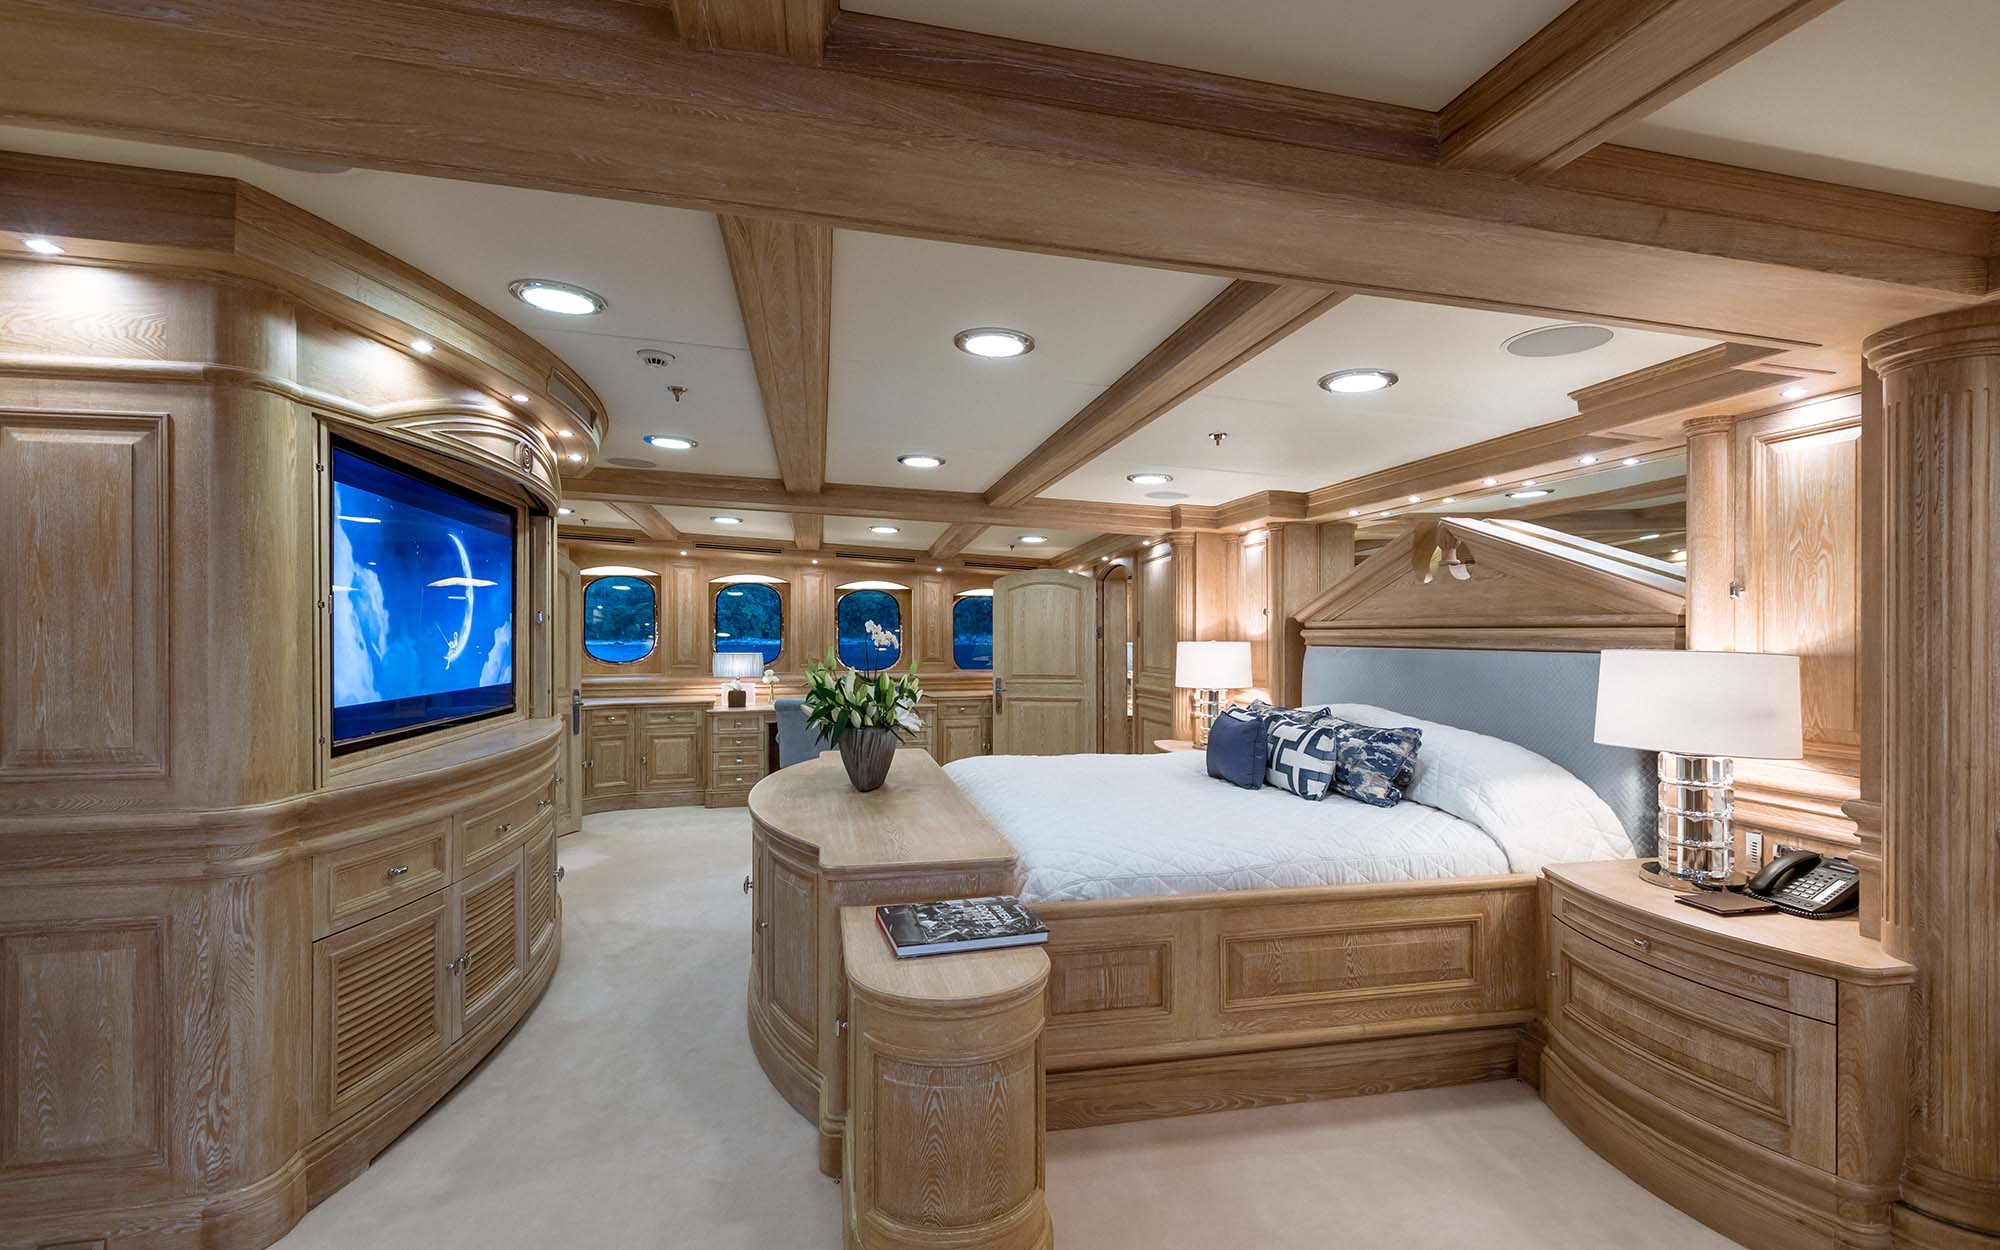 NERO Yacht master suite with private dining table